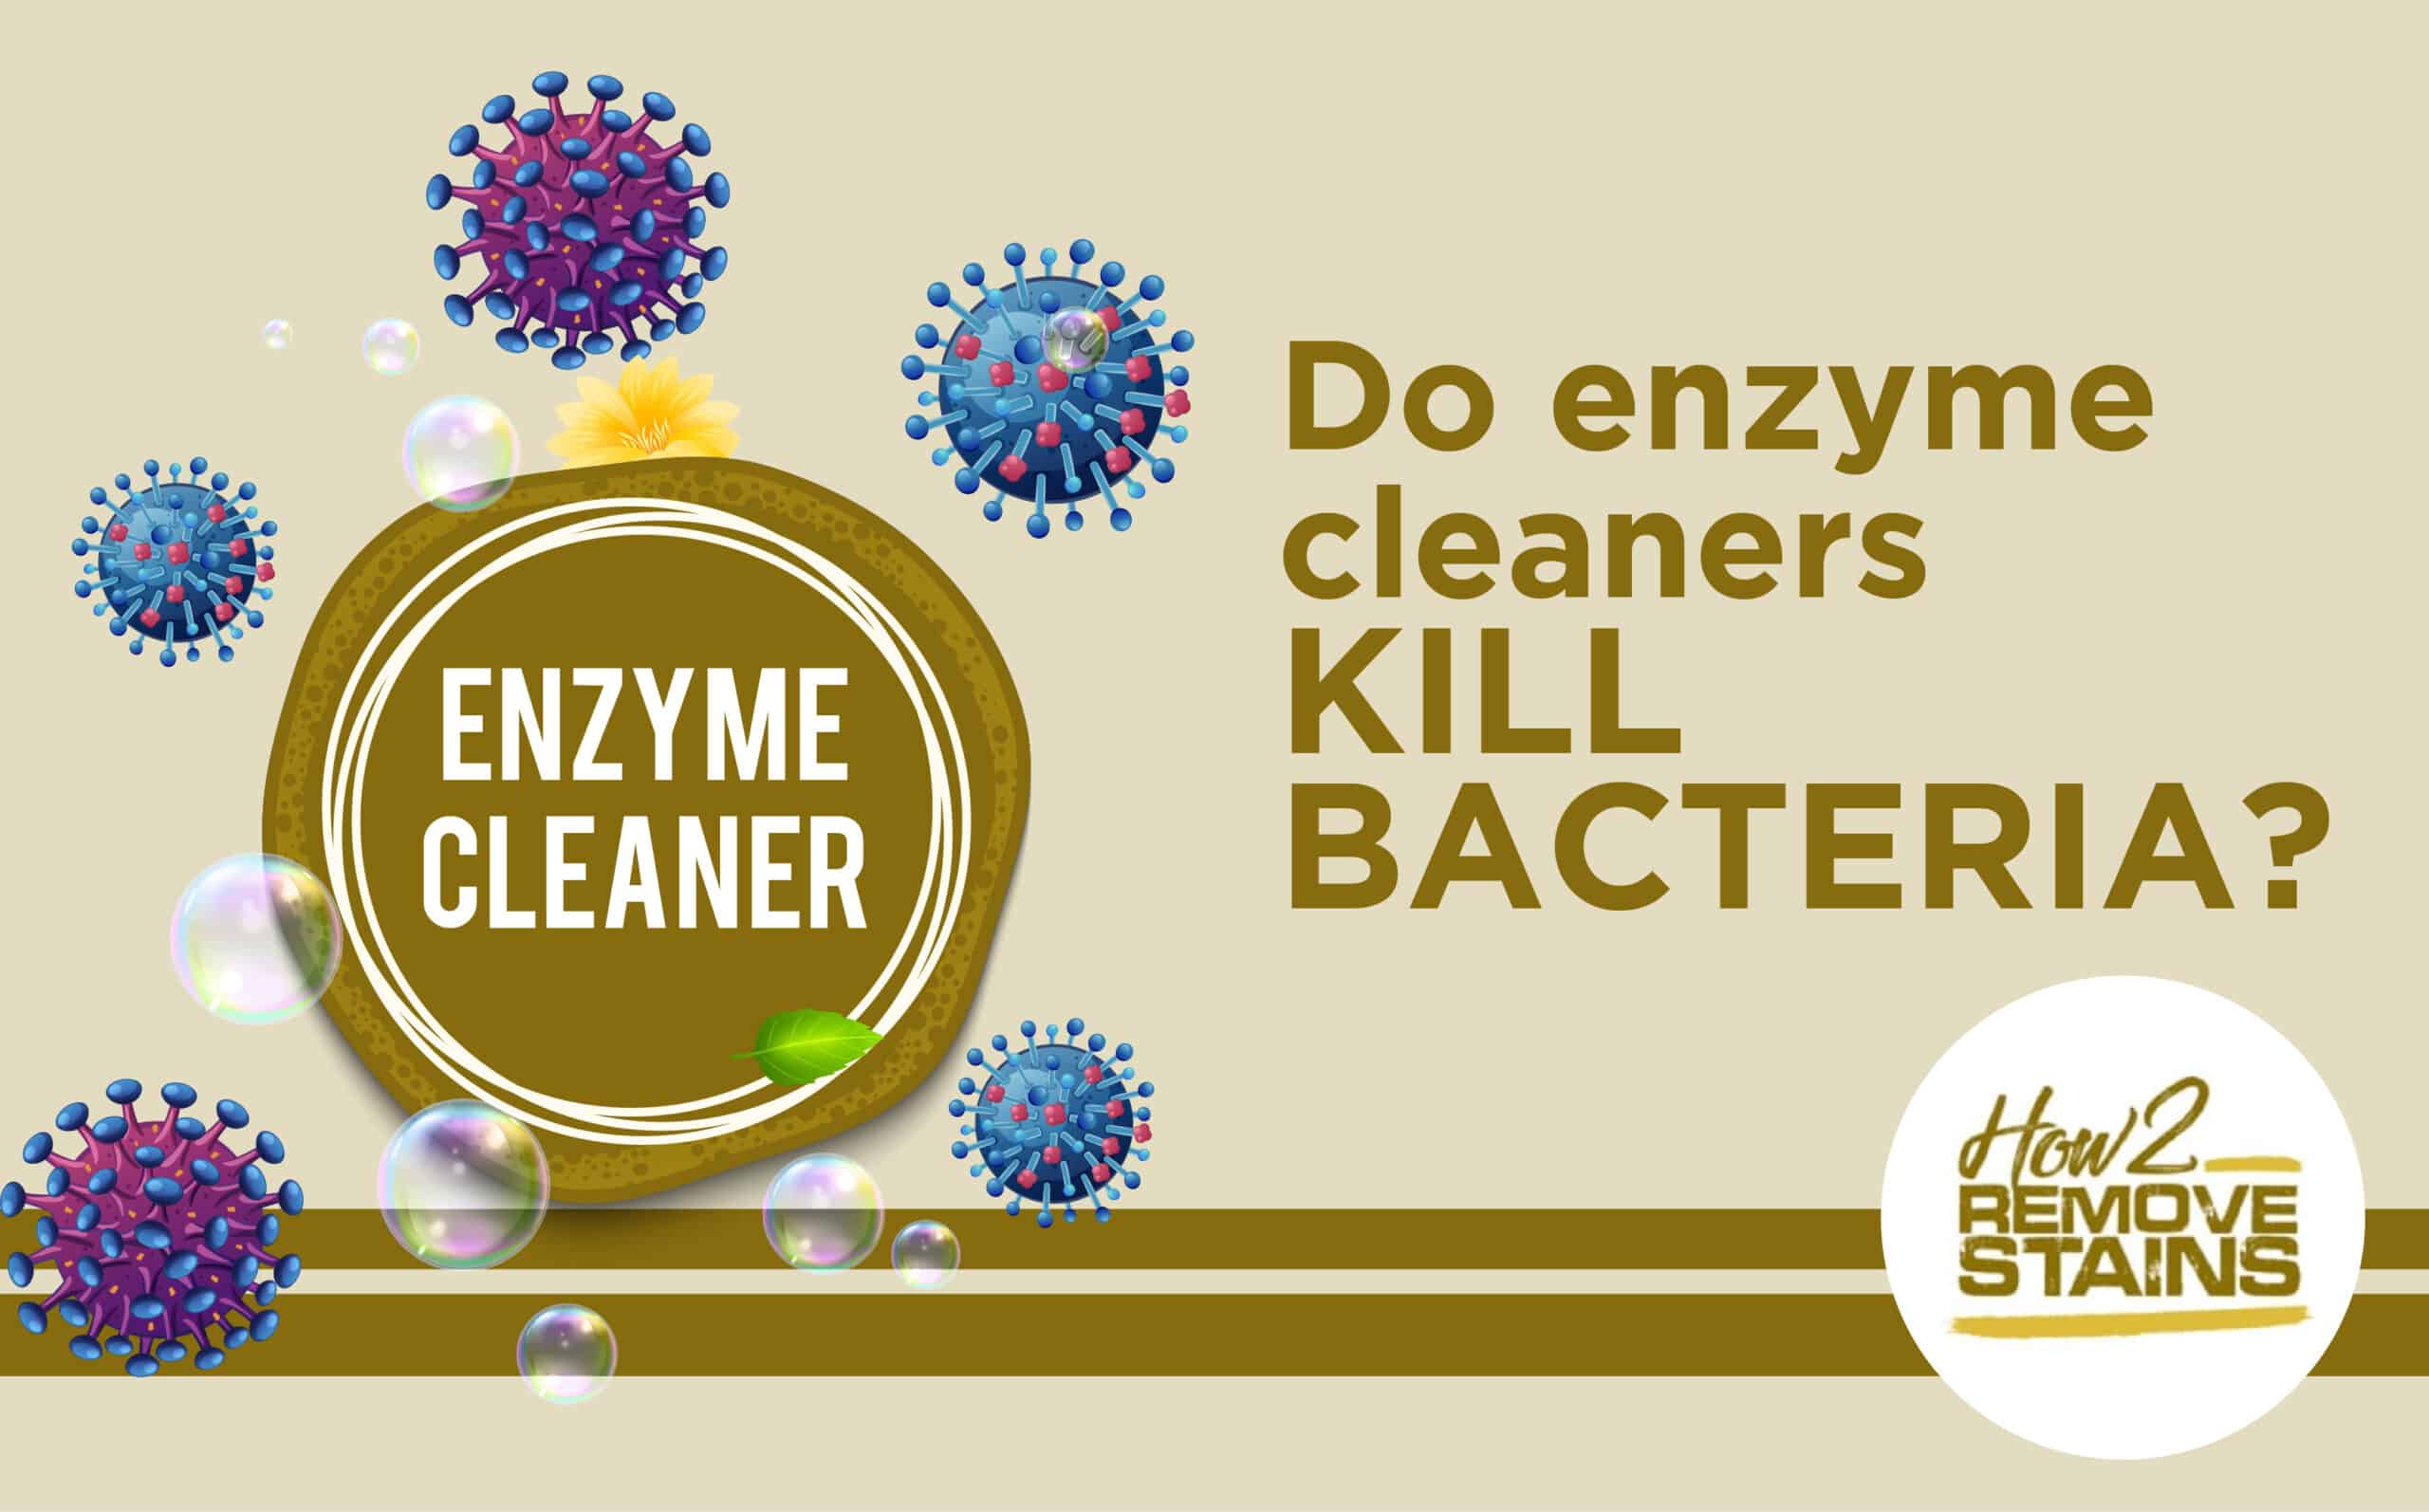 Do enzyme cleaners kill bacteria